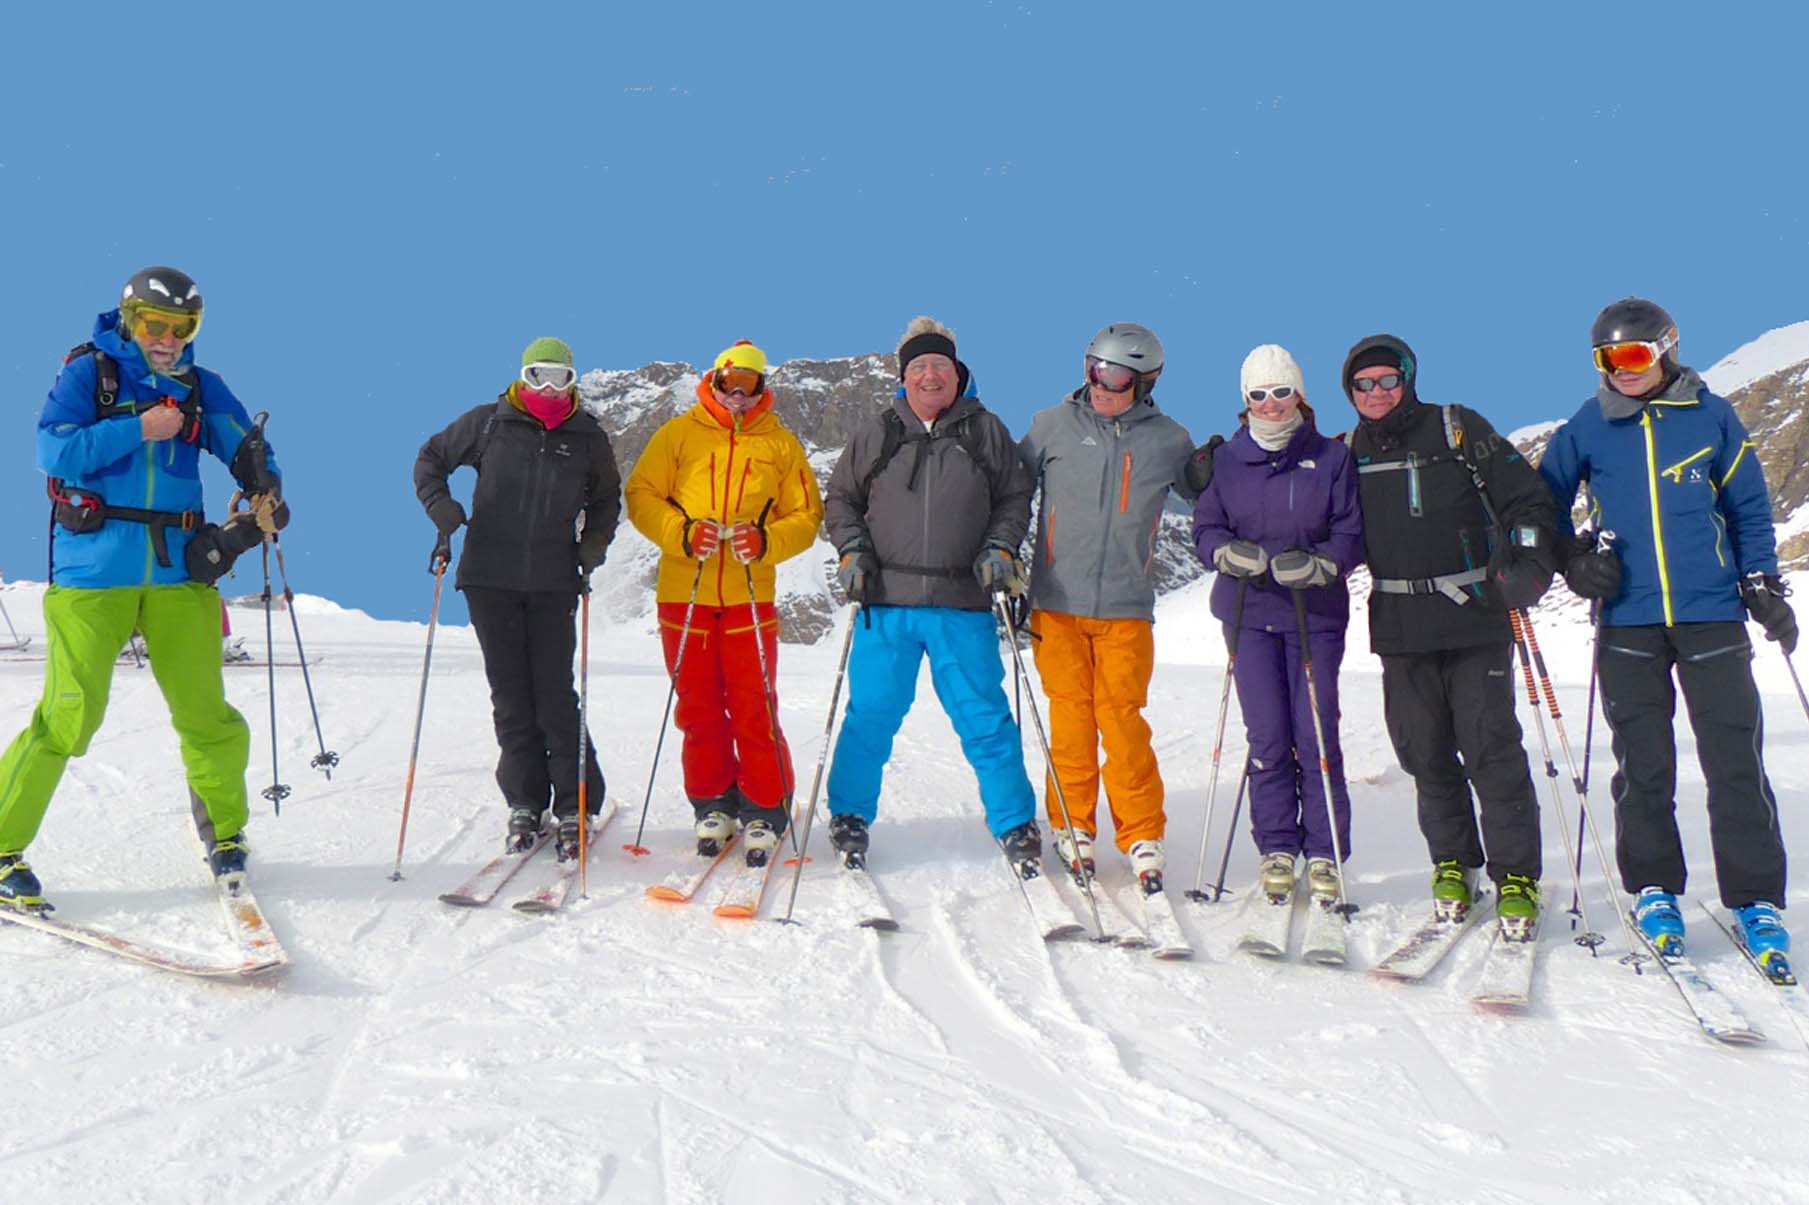 YSE friends skiing